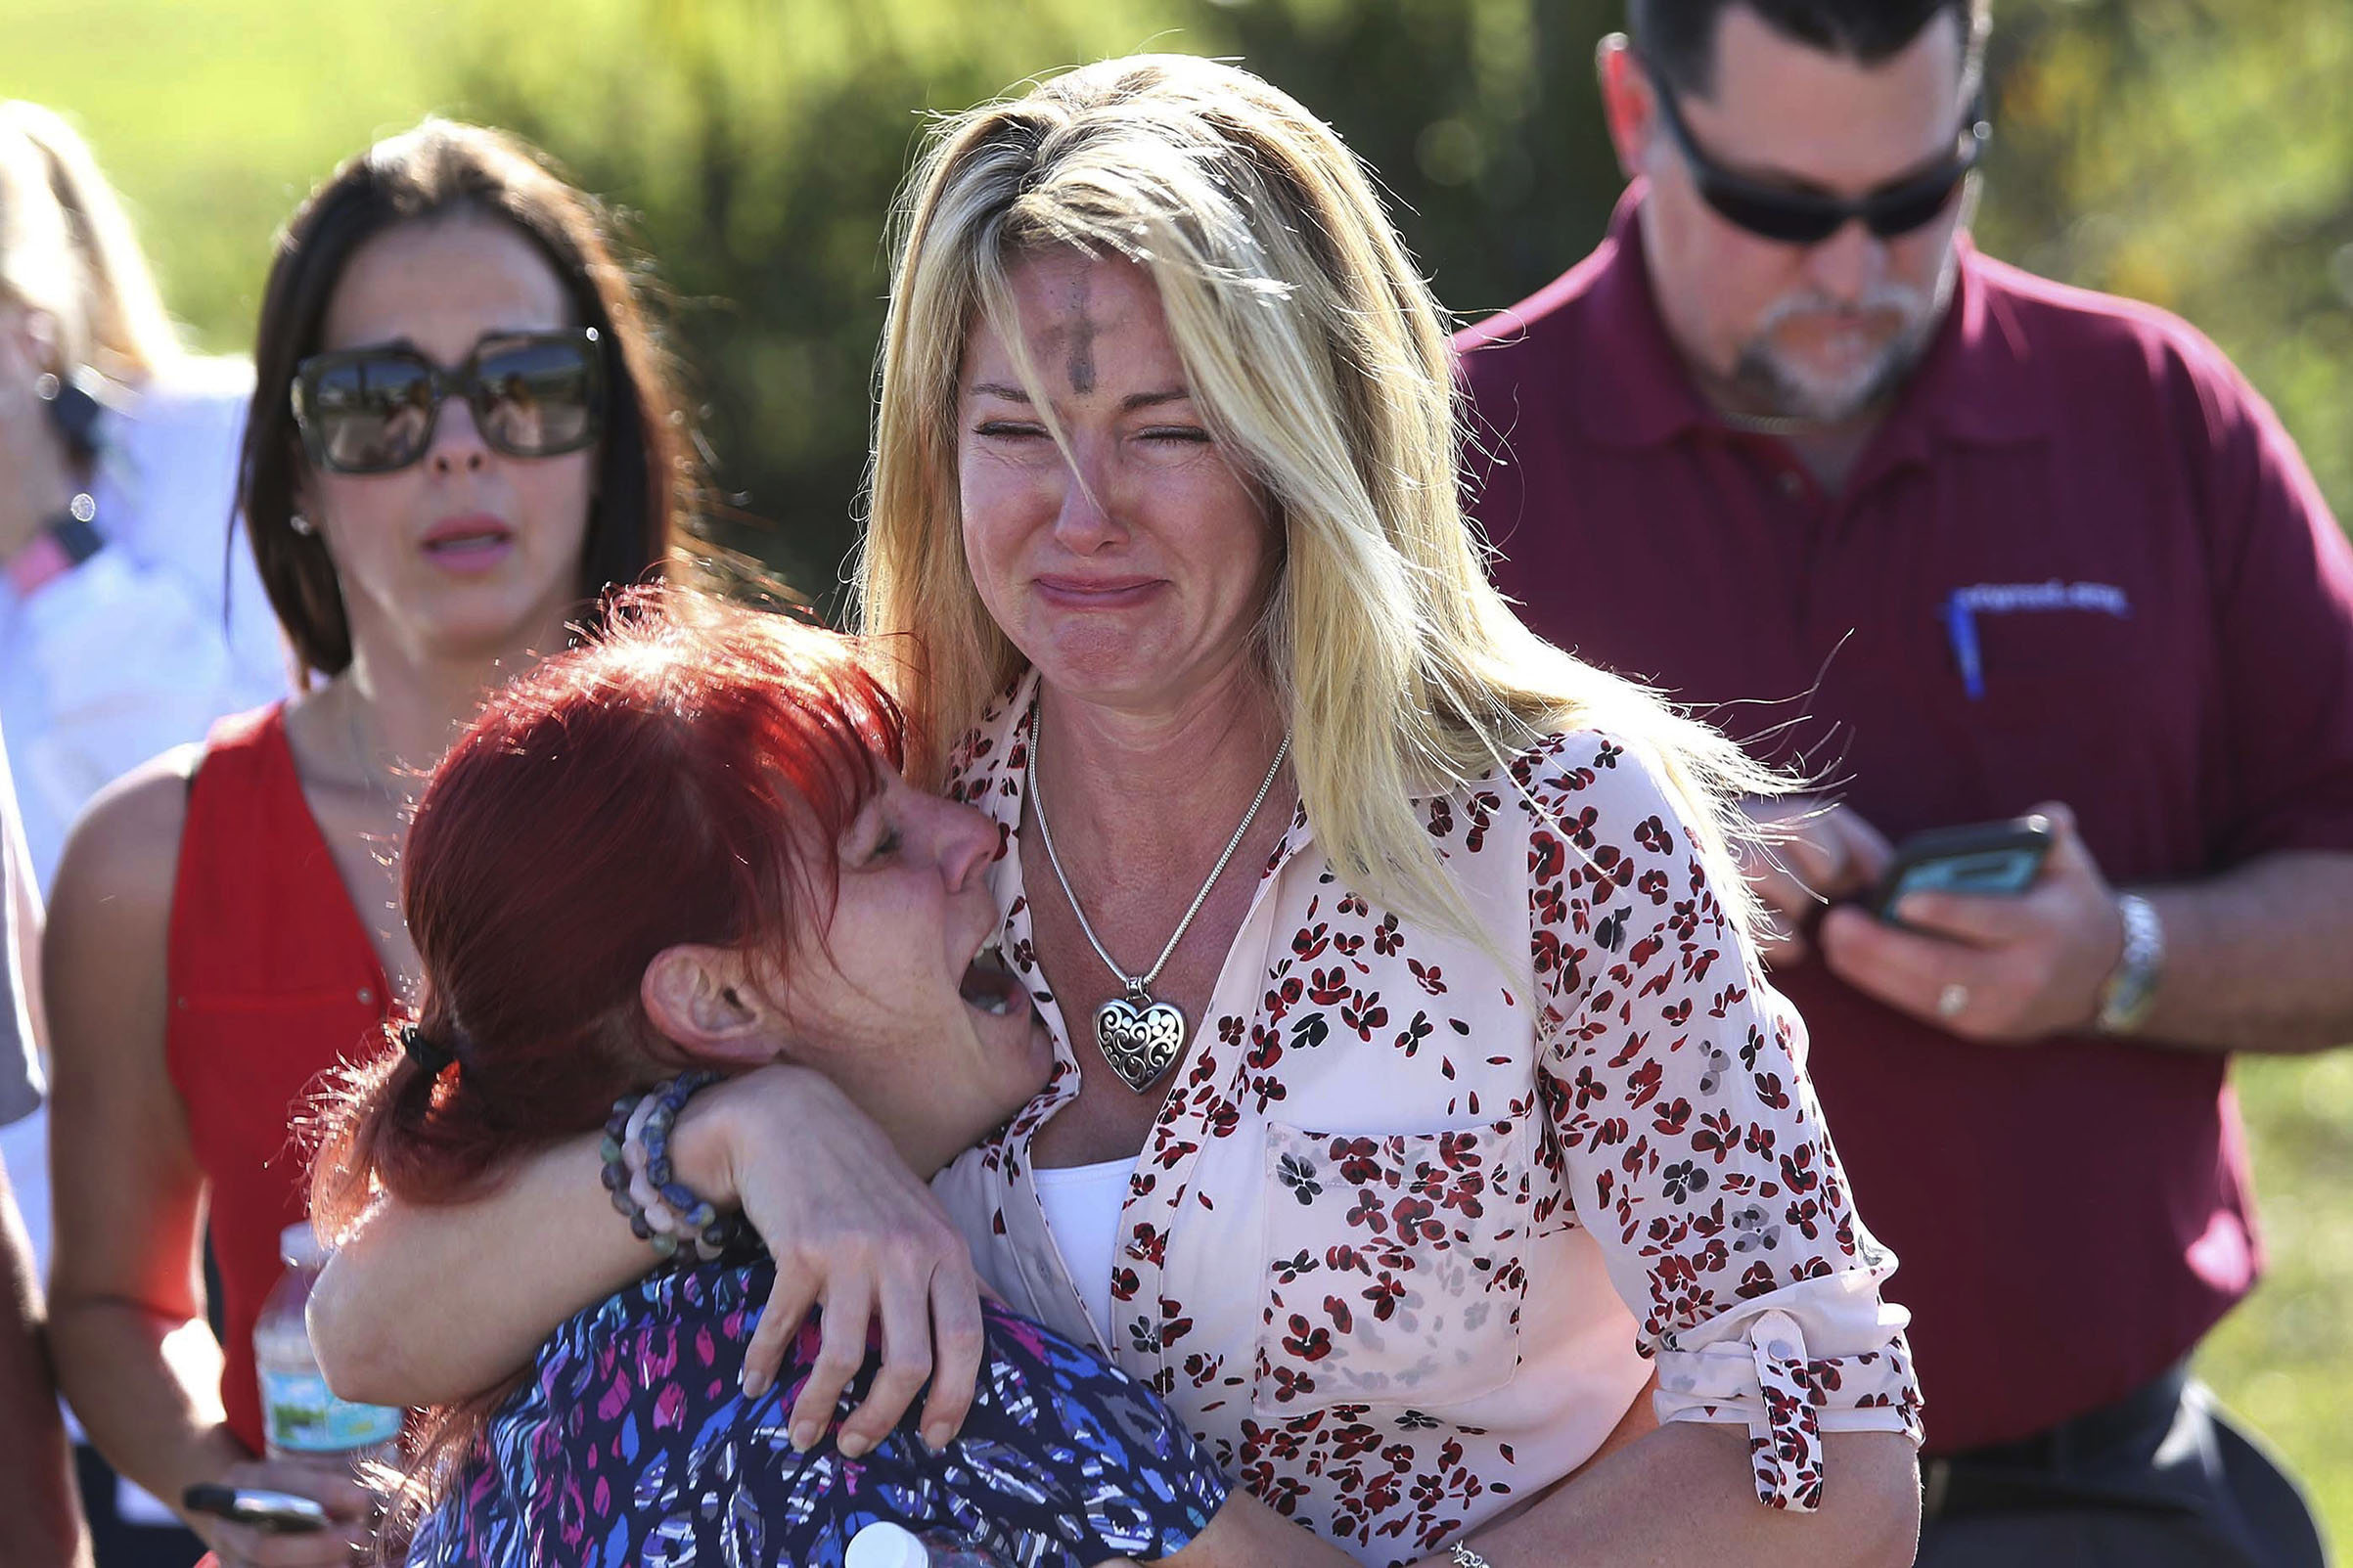 Parents wait for news after a reports of a shooting at Marjory Stoneman Douglas High School in Parkland, Fla., on Feb. 14, 2018. (Joel Auerbach—AP)